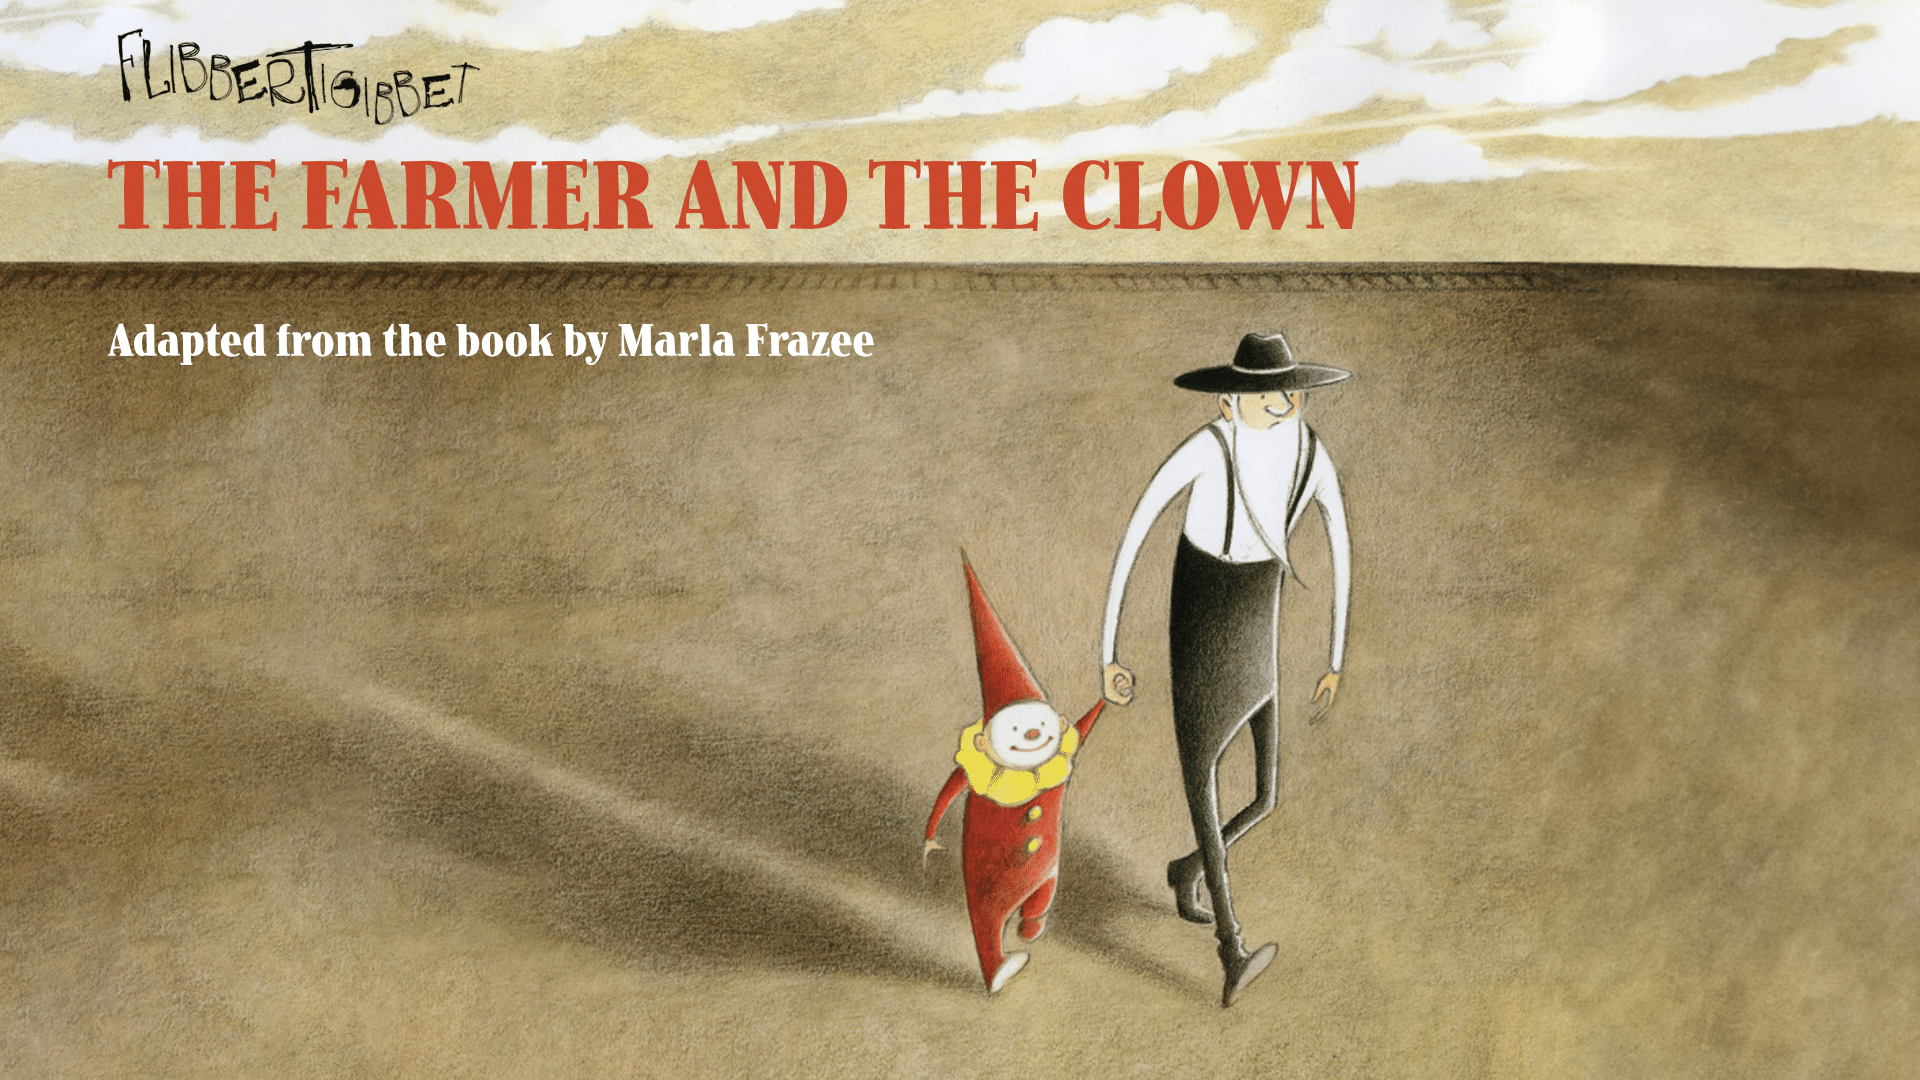 A sepia-toned illustration of a tall, bearded farmer walking hand-in-hand with a short, brightly-dressed clown through a flat, barren landscape. Text reads 'Flibbertigibbet'; The Farmer and the Clown'; 'Adapted from the book by Marla Frazee'.